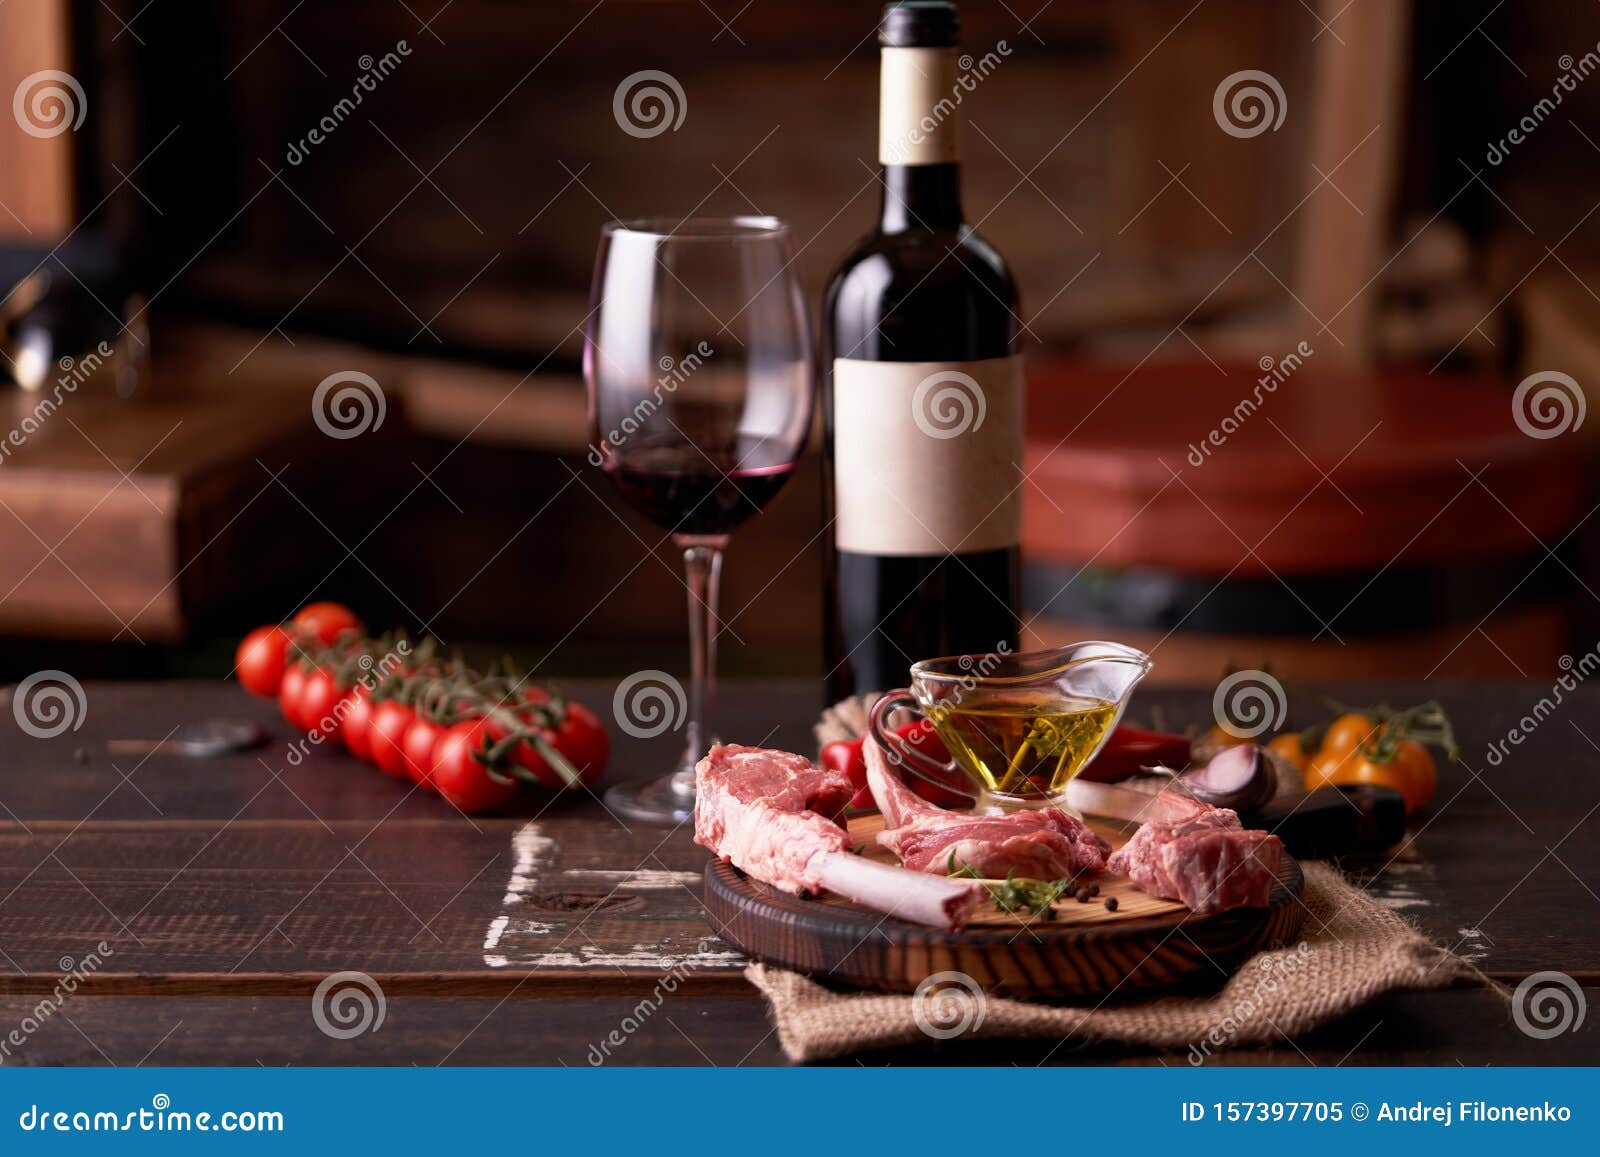 Download 7 341 Red Wine Glass Bottle Yellow Background Photos Free Royalty Free Stock Photos From Dreamstime Yellowimages Mockups